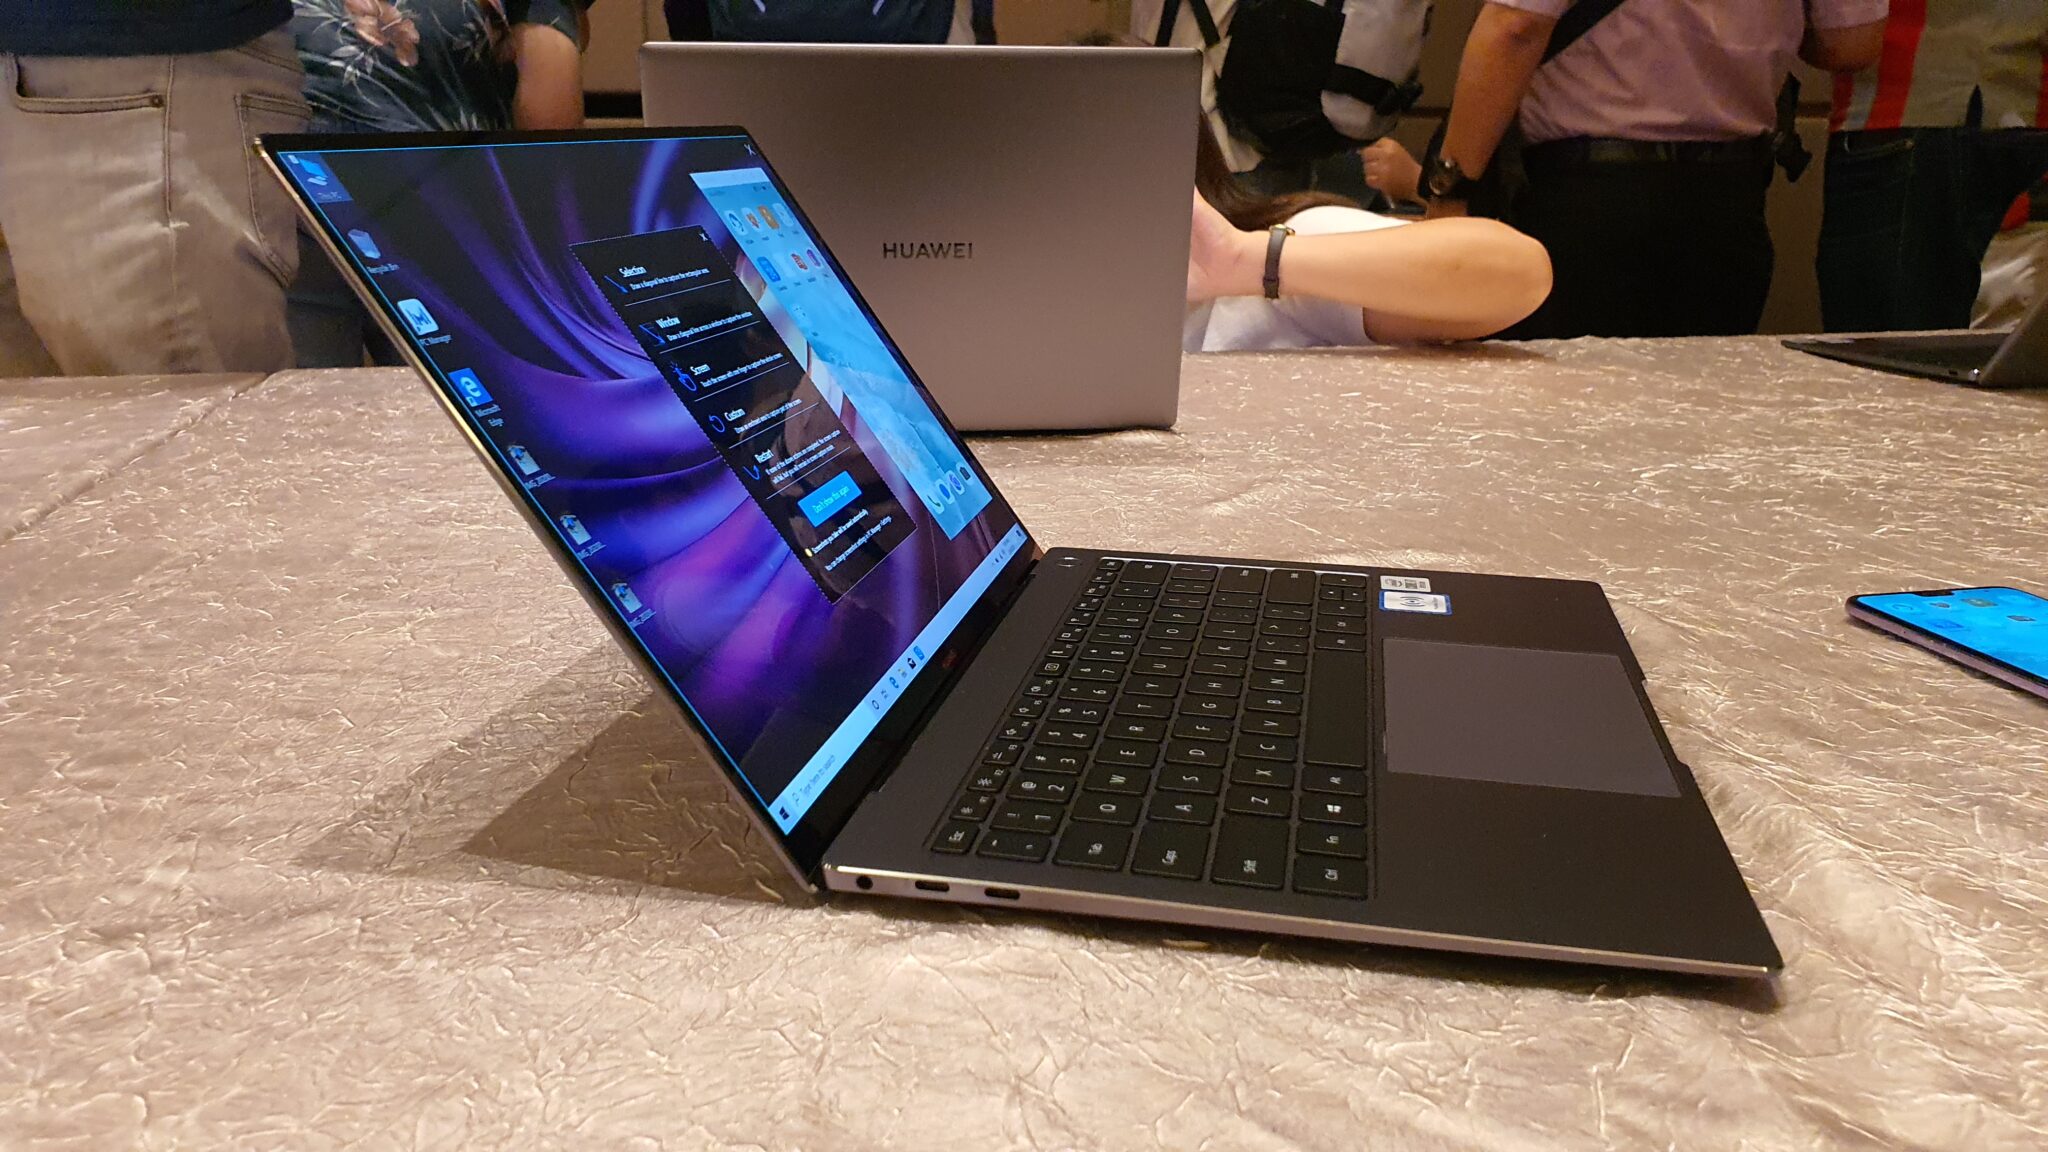 Huawei MateBook X Pro gets new 10th Gen Intel CPUs and sexier design